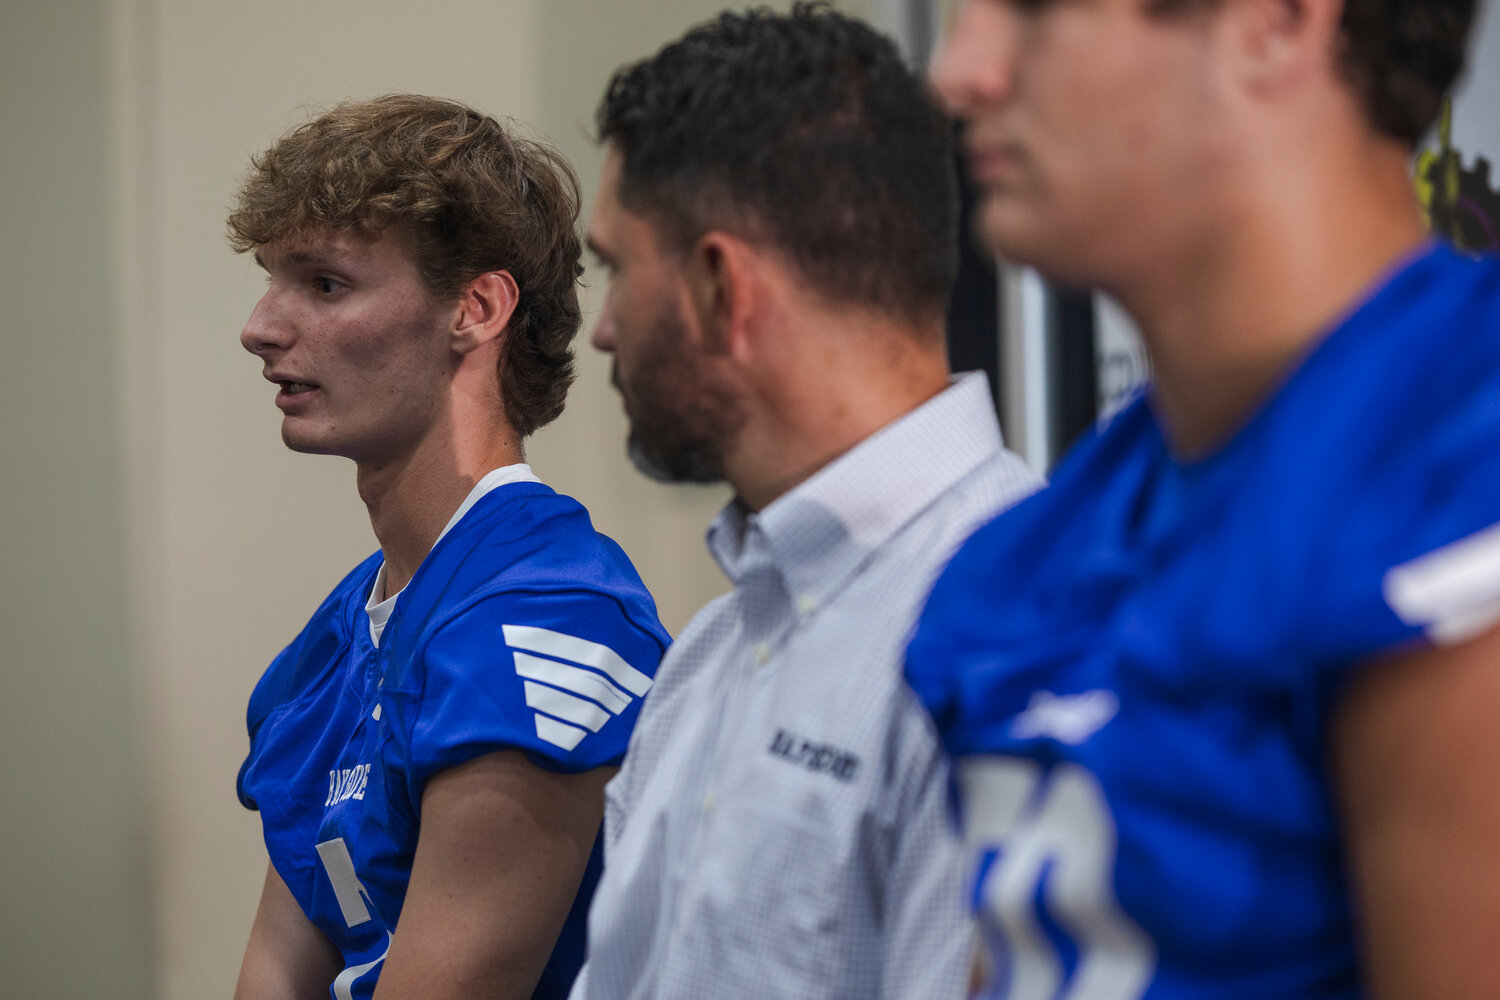 Admiral senior Tait Moore responds to a question during Gulf Coast Media Day on July 27 in Orange Beach. Moore will return to Bayside Academy’s starting lineup as a weapon in many positions according to head coach Barrett Trotter.